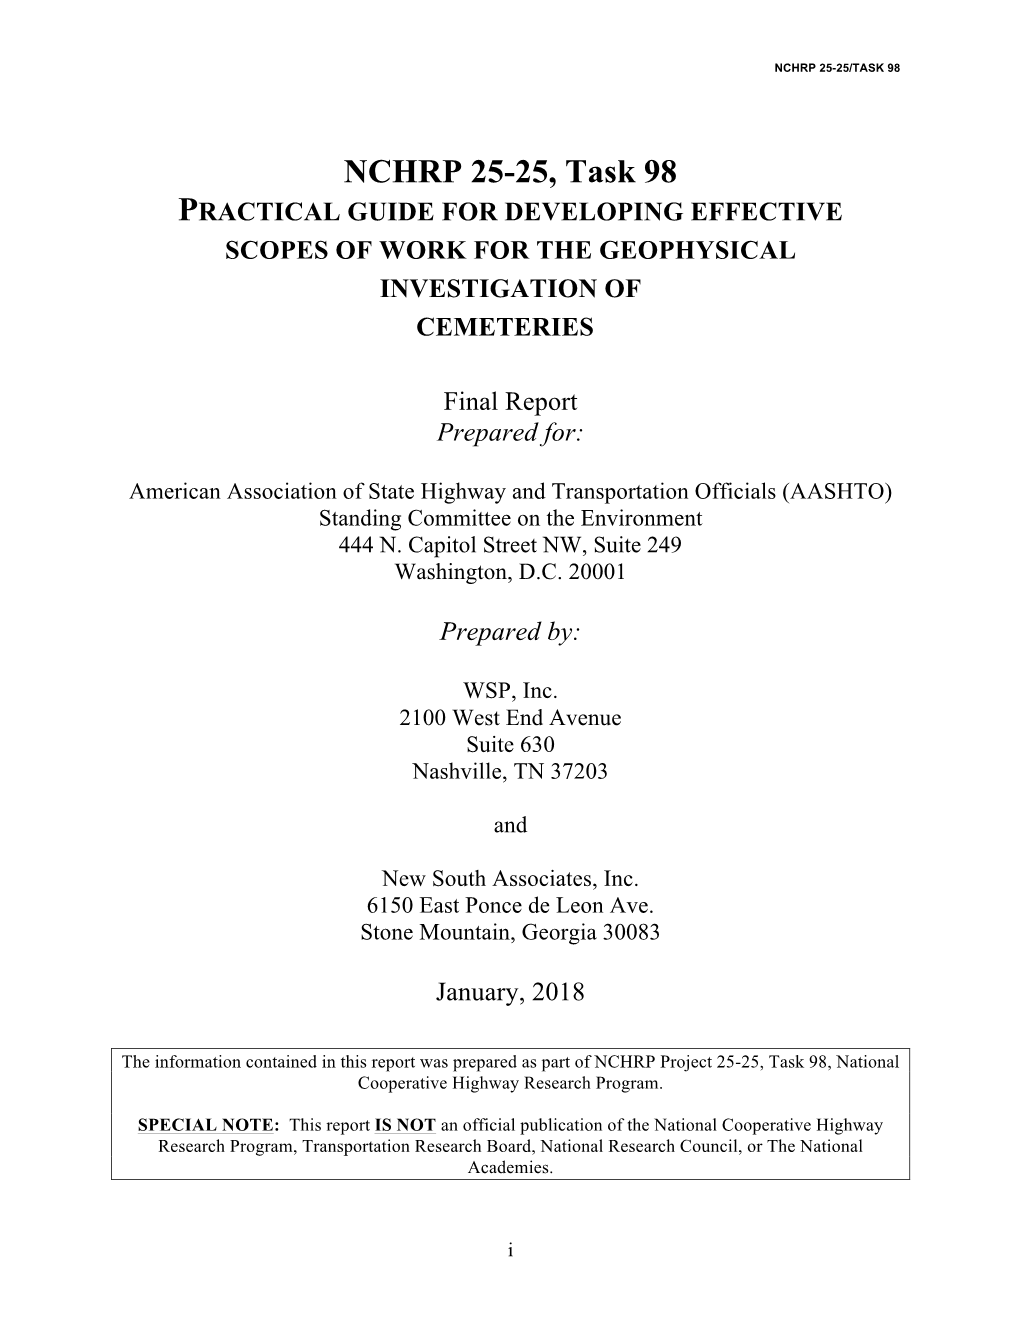 NCHRP 25-25, Task 98 PRACTICAL GUIDE for DEVELOPING EFFECTIVE SCOPES of WORK for the GEOPHYSICAL INVESTIGATION of CEMETERIES